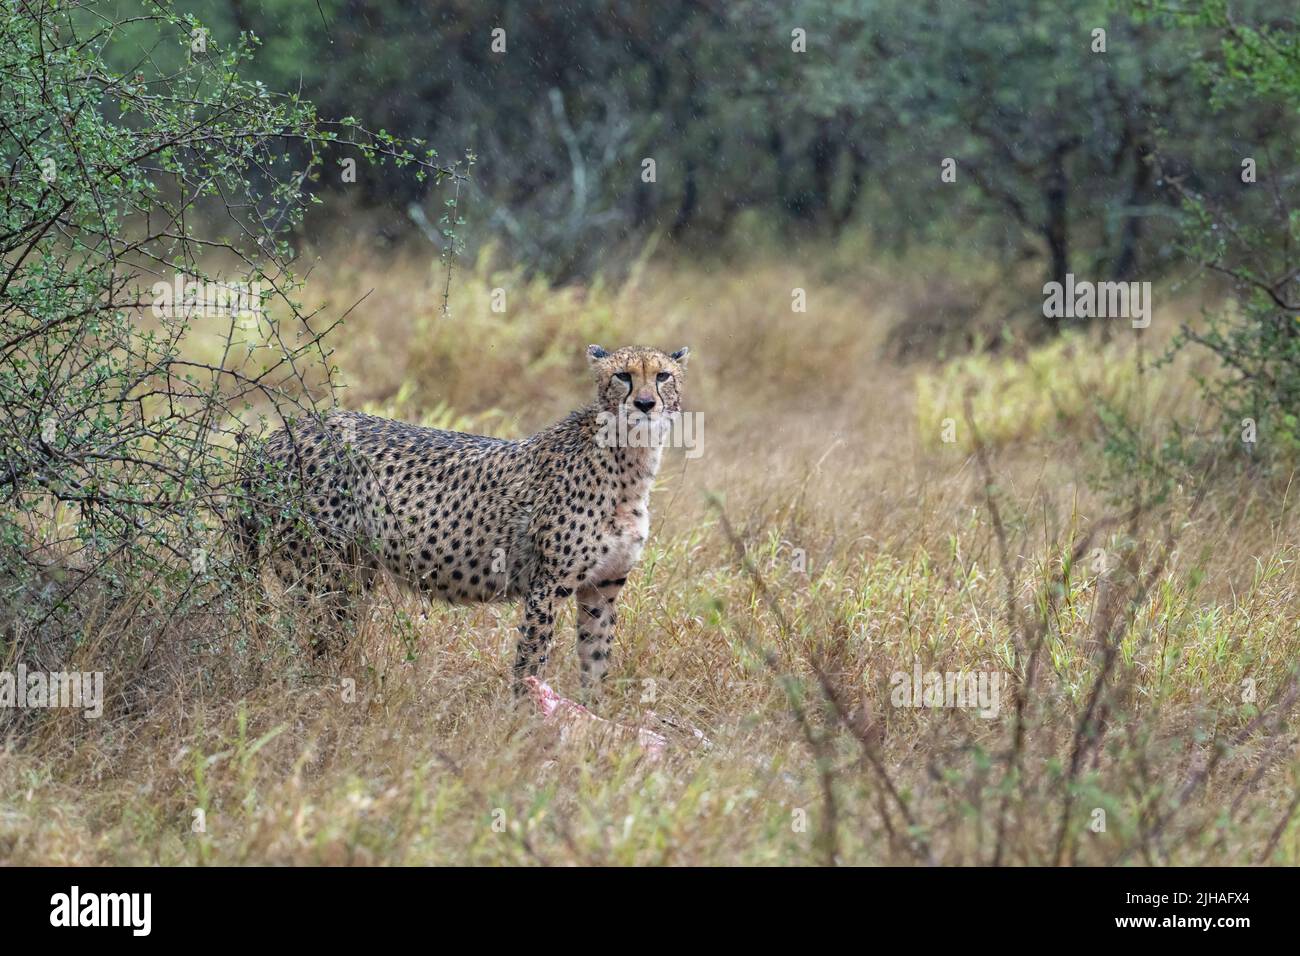 CHEETAH standong in tall grass - Kruger Park, South Africa Stock Photo